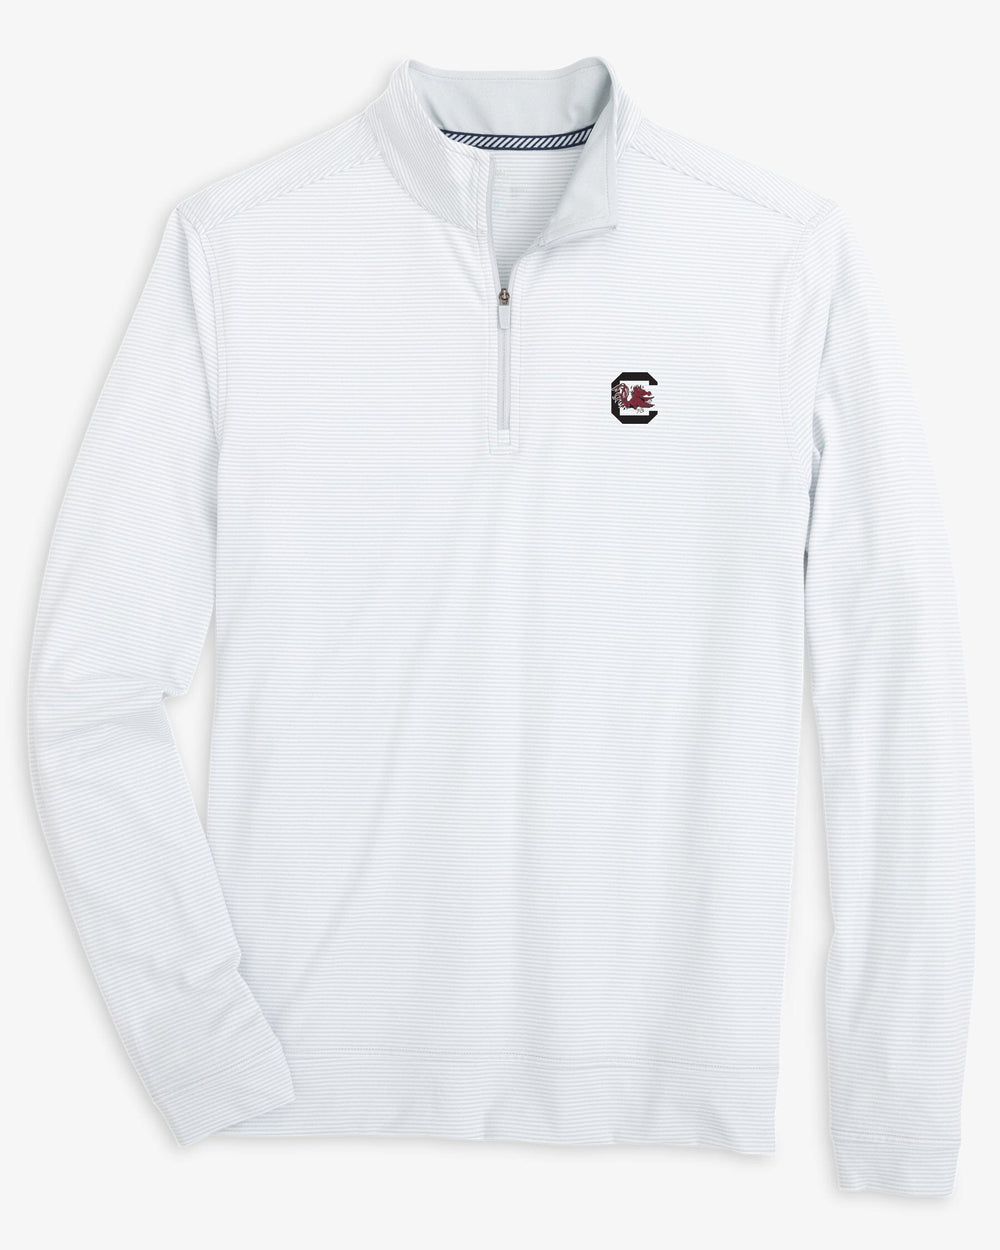 The front view of the USC Gamecocks Cruiser Micro-Stripe Heather Quarter Zip by Southern Tide - Heather Slate Grey